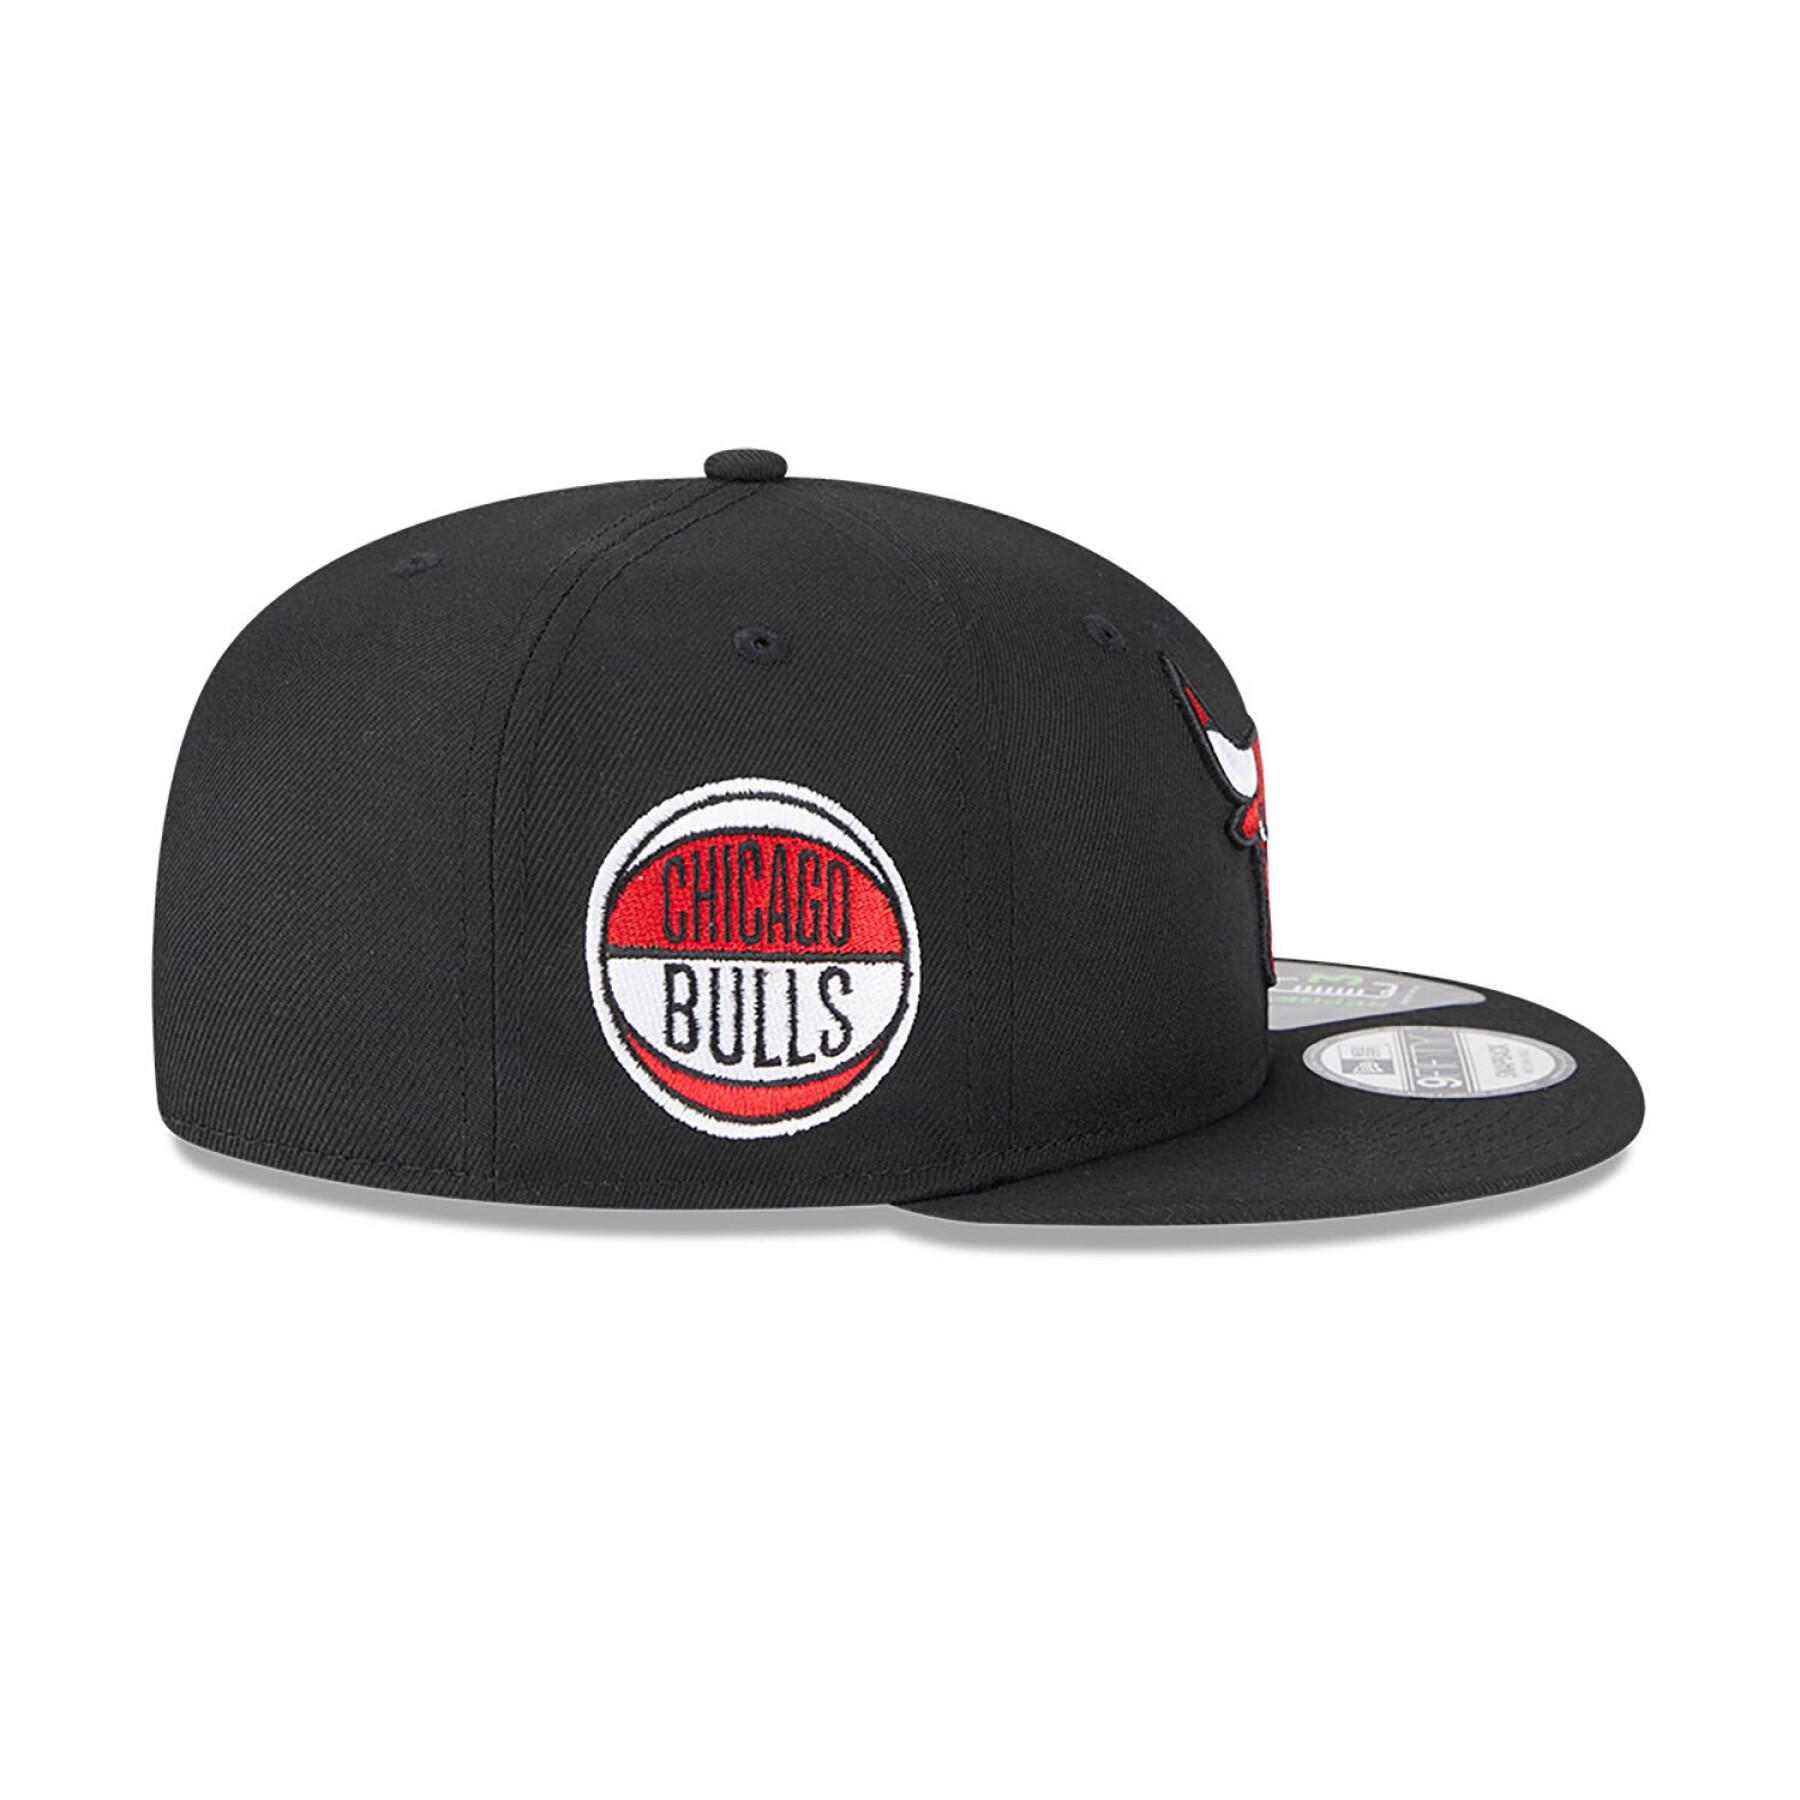 Kappe Chicago Bulls 9FIFTY